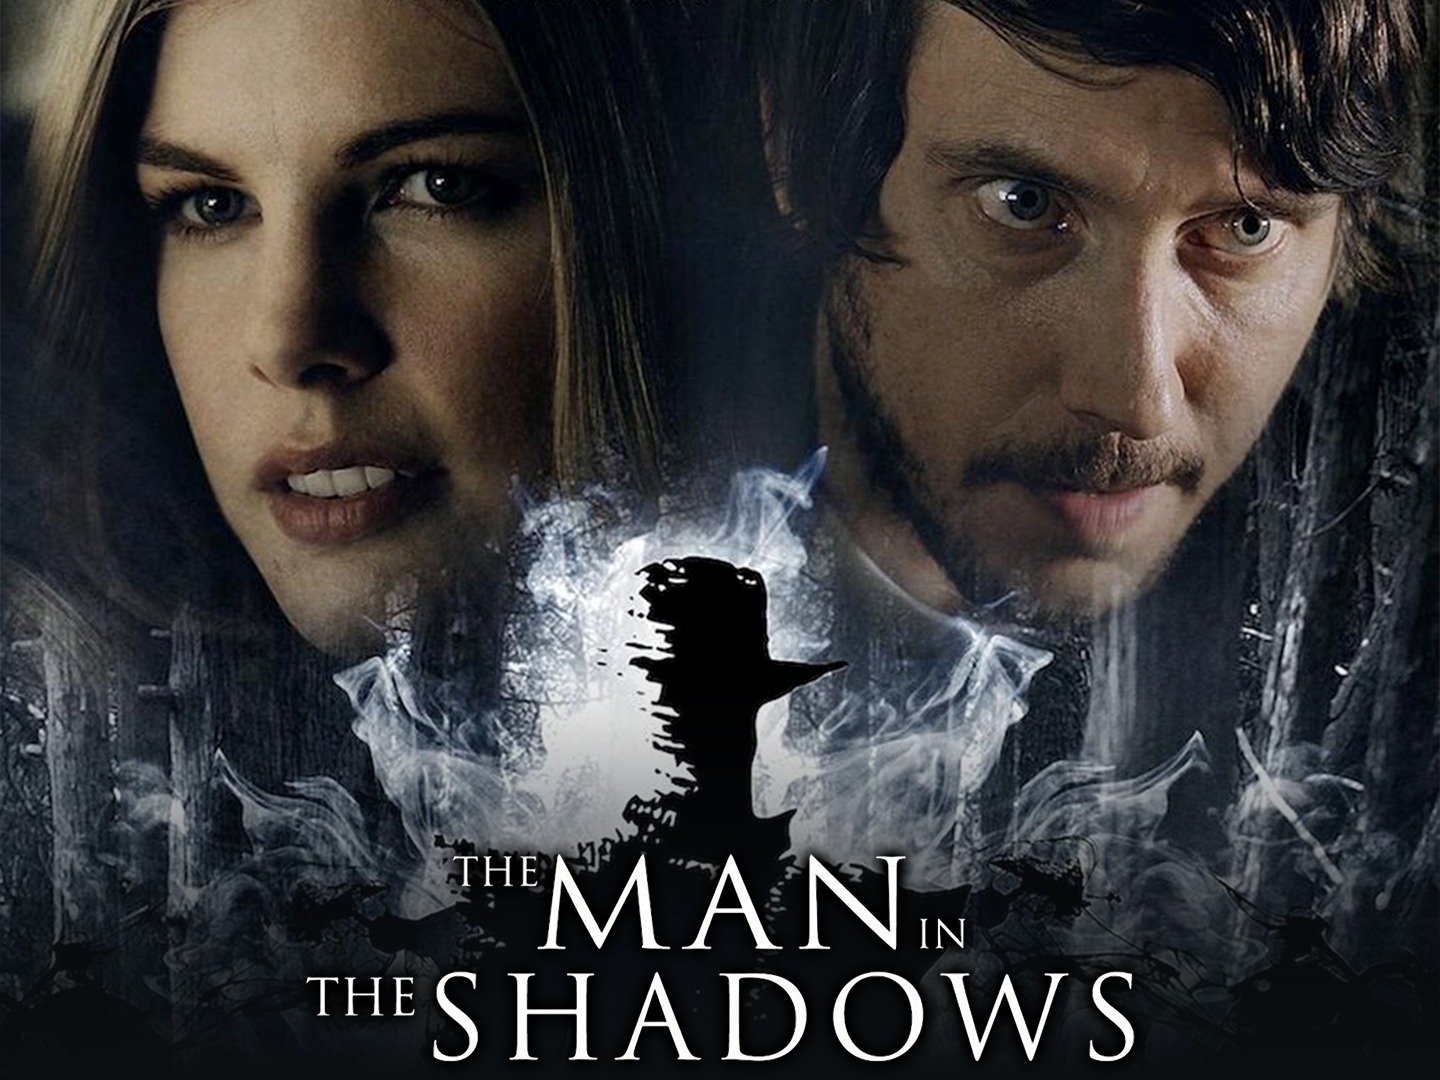 The man from the shadow. Man in the Shadows 2017. Man in the Shadows 2017 Josh Fraiman. Ieschure - 2017 - the Shadow. The Shadow like me.